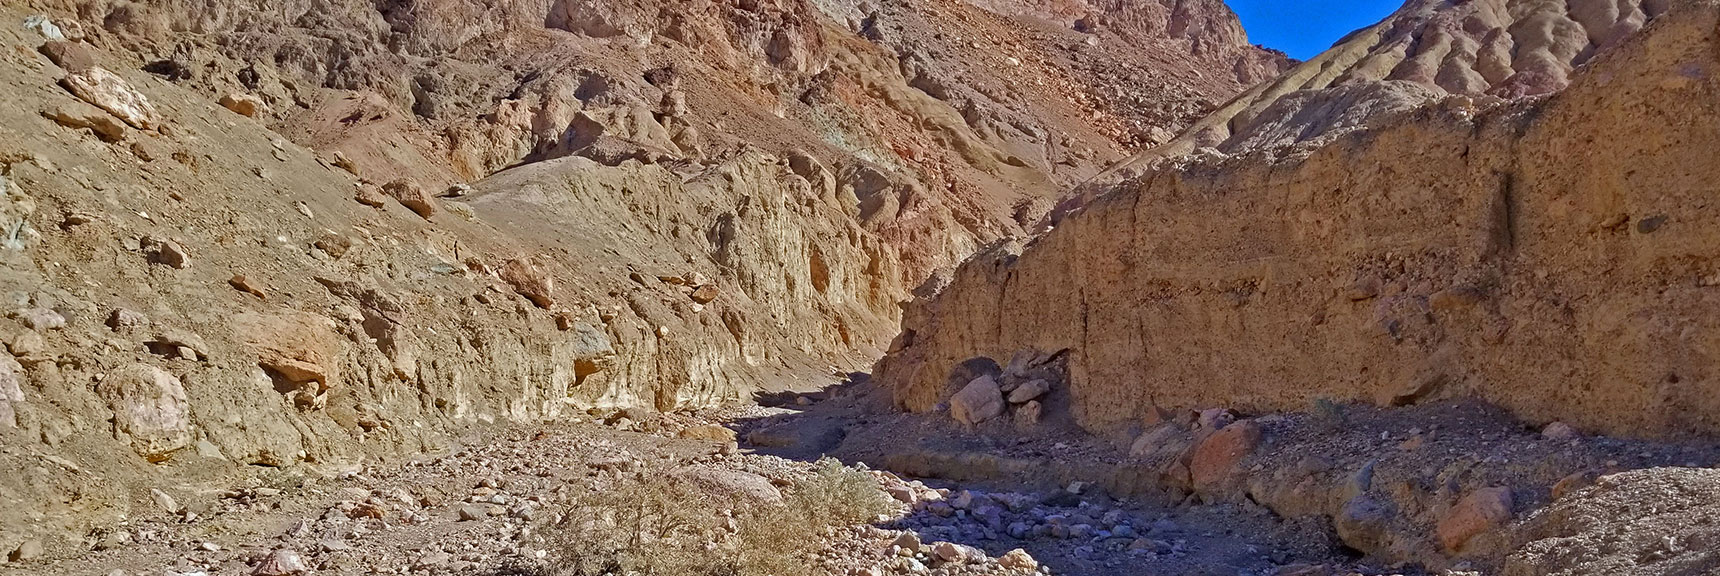 Entering First Dip Canyon off of Artist Drive | Artists Drive Hidden Canyon Hikes | Death Valley National Park, California